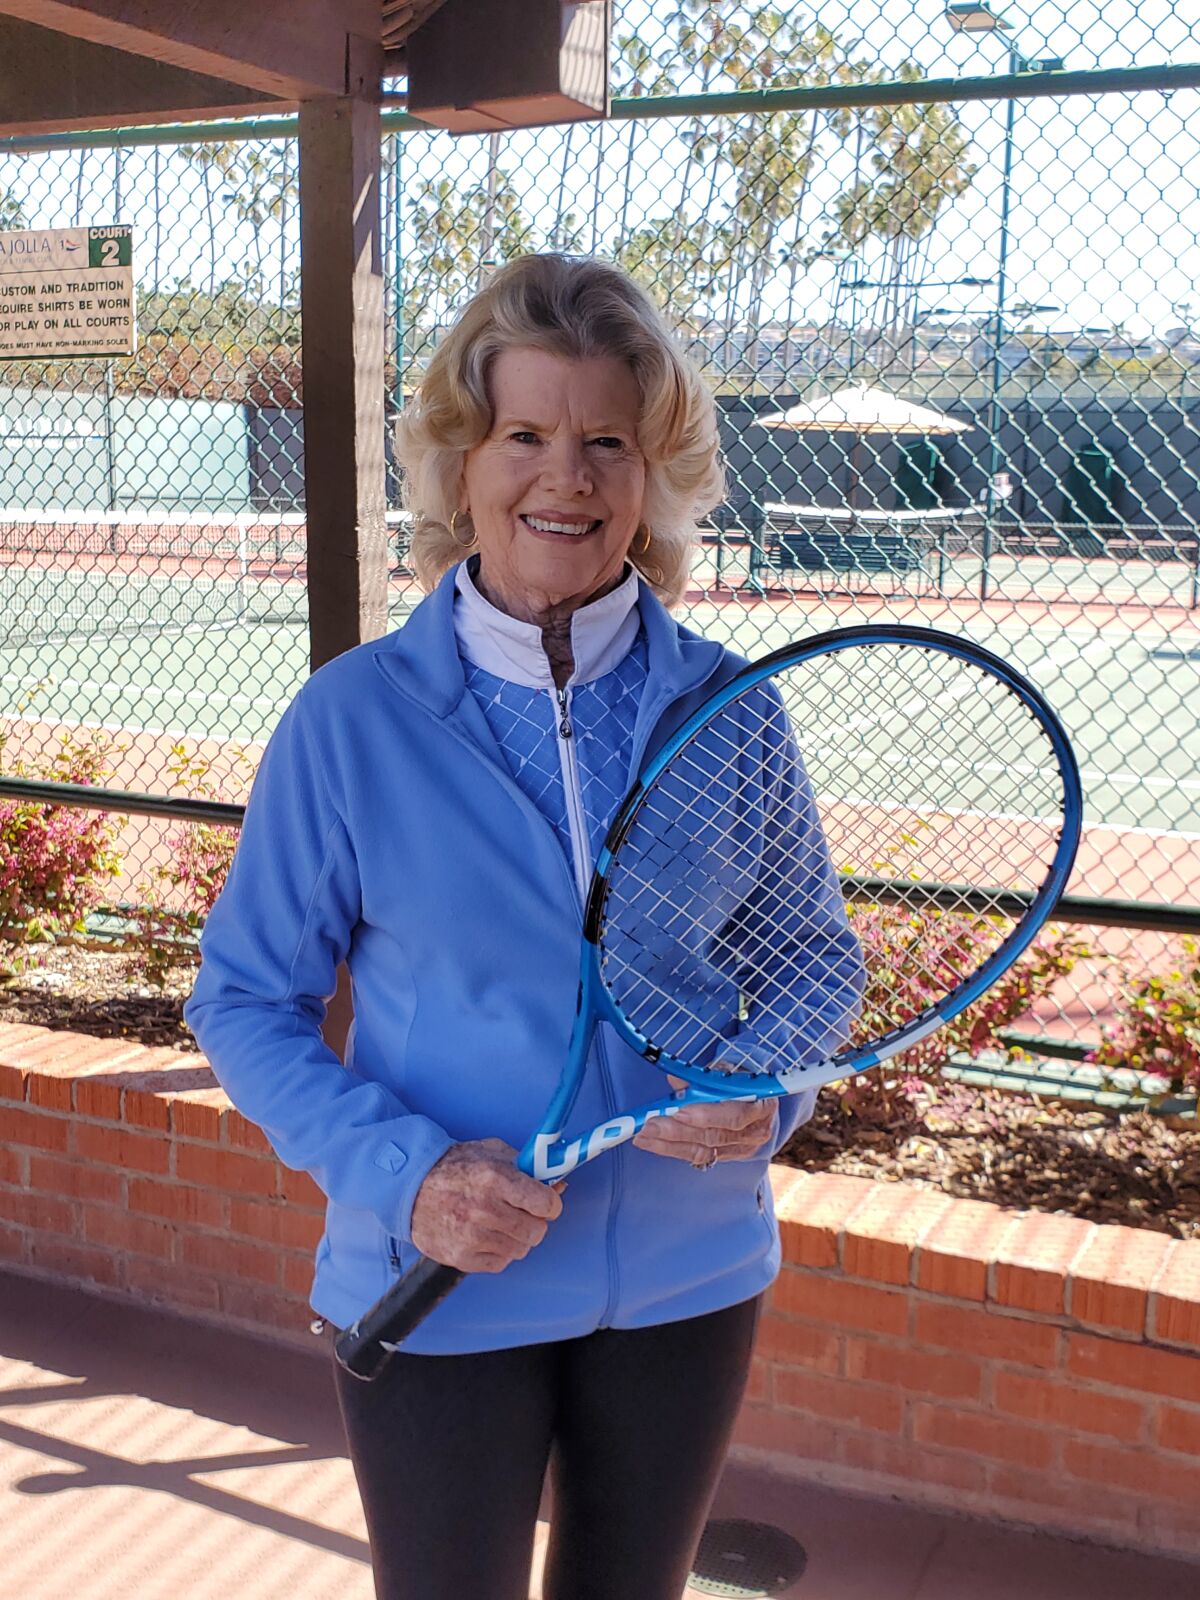 La Jolla resident Suella Steel has won 100 gold balls in tennis for national title victories.